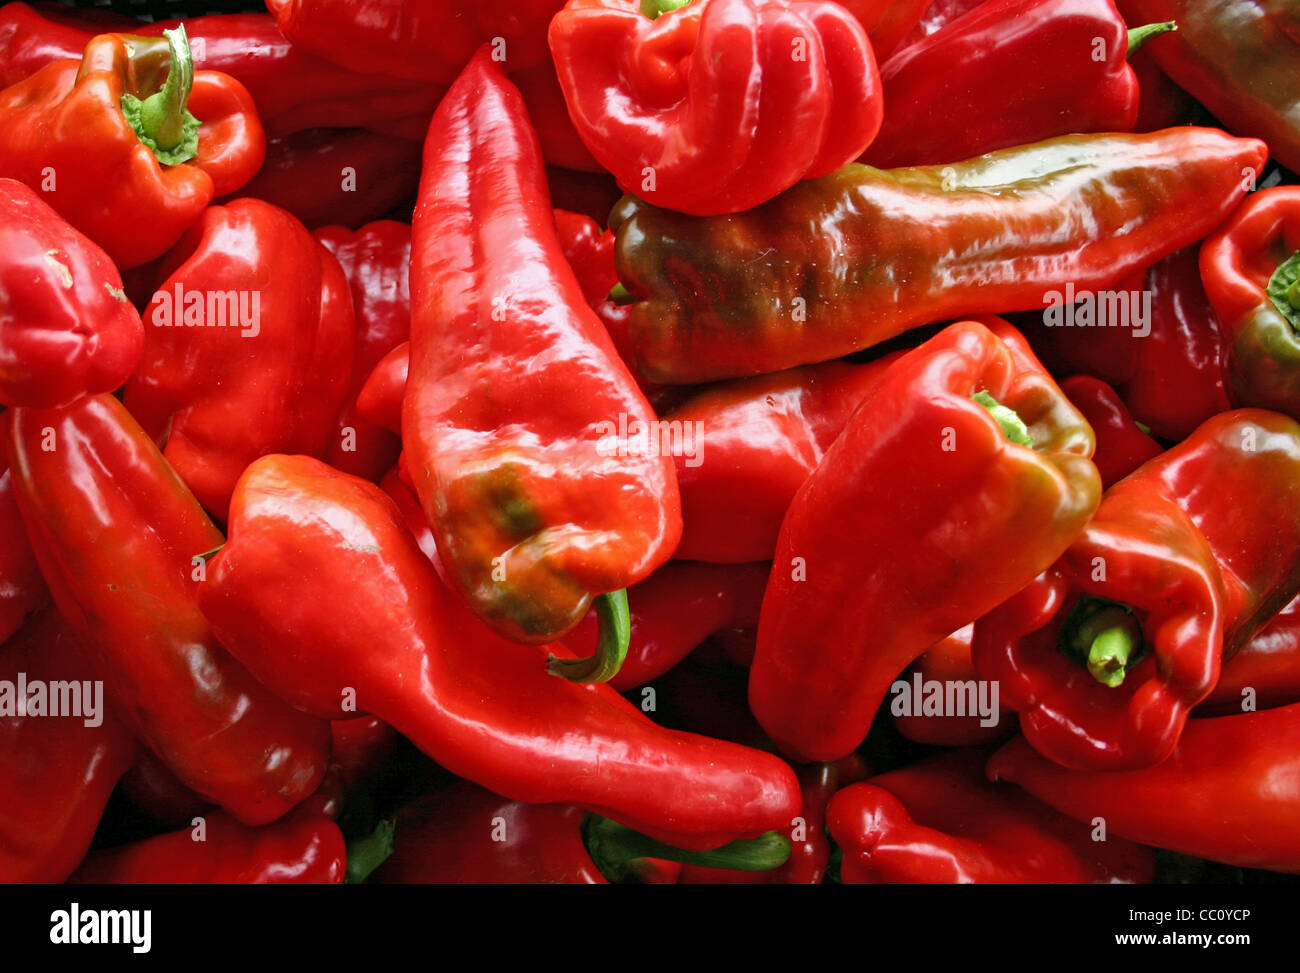 A large group of beautiful red peppers Stock Photo